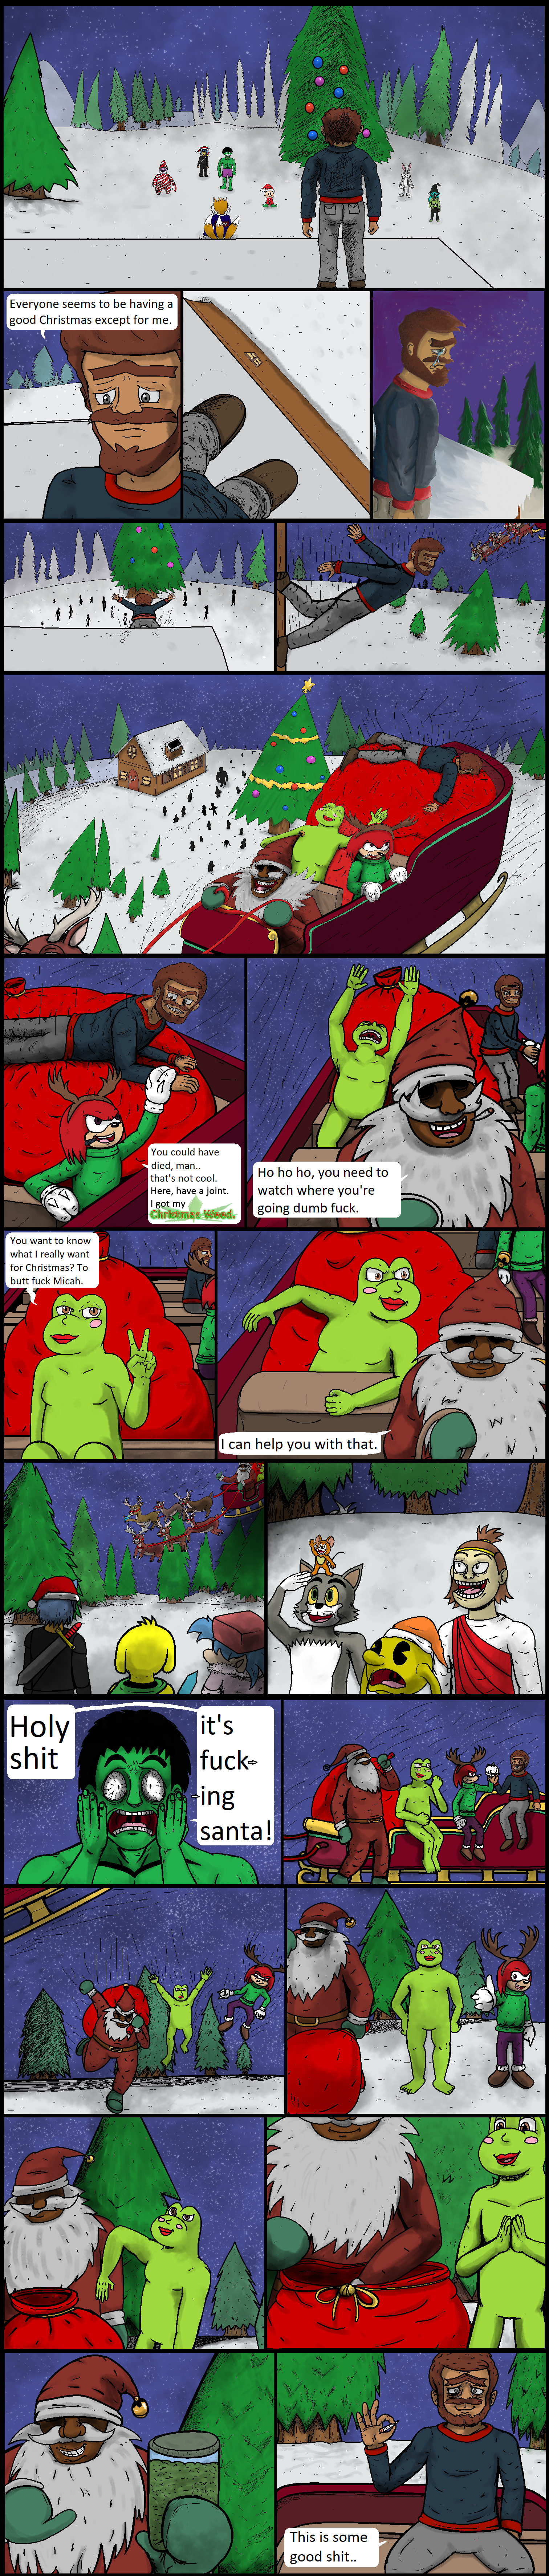 xmas/pg4.png. If you're seeing this, enable images. If you have them enabled, email commodorian@tailsgetstrolled.org with a detailed description of how you got here. (Screenshots help!)